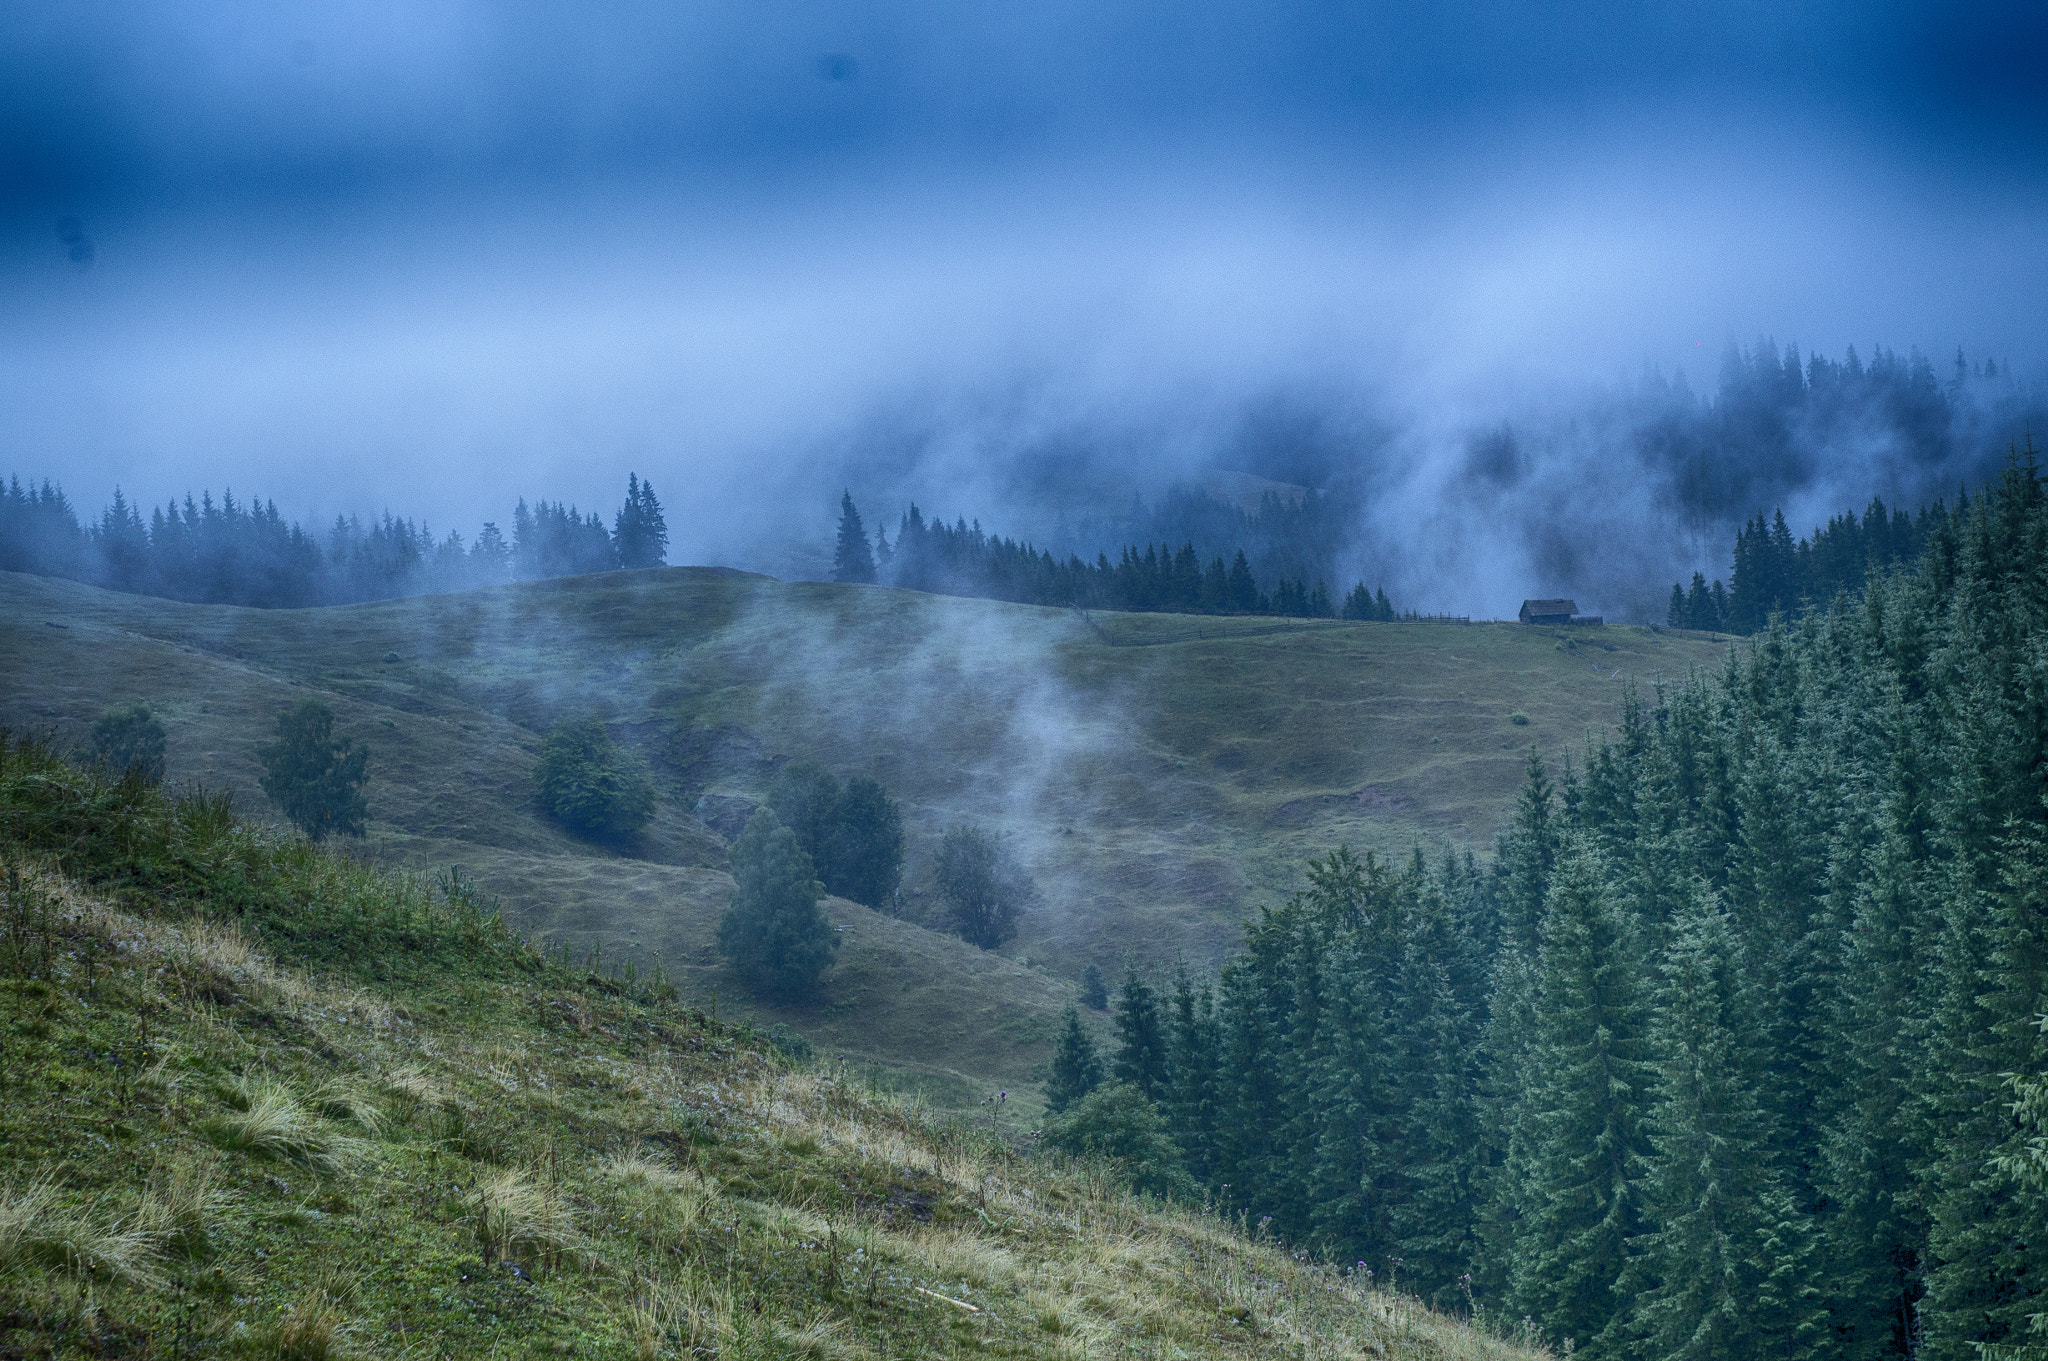 Sony SLT-A57 + Tamron SP 24-70mm F2.8 Di VC USD sample photo. My misty mornings on the mountains part 3 photography